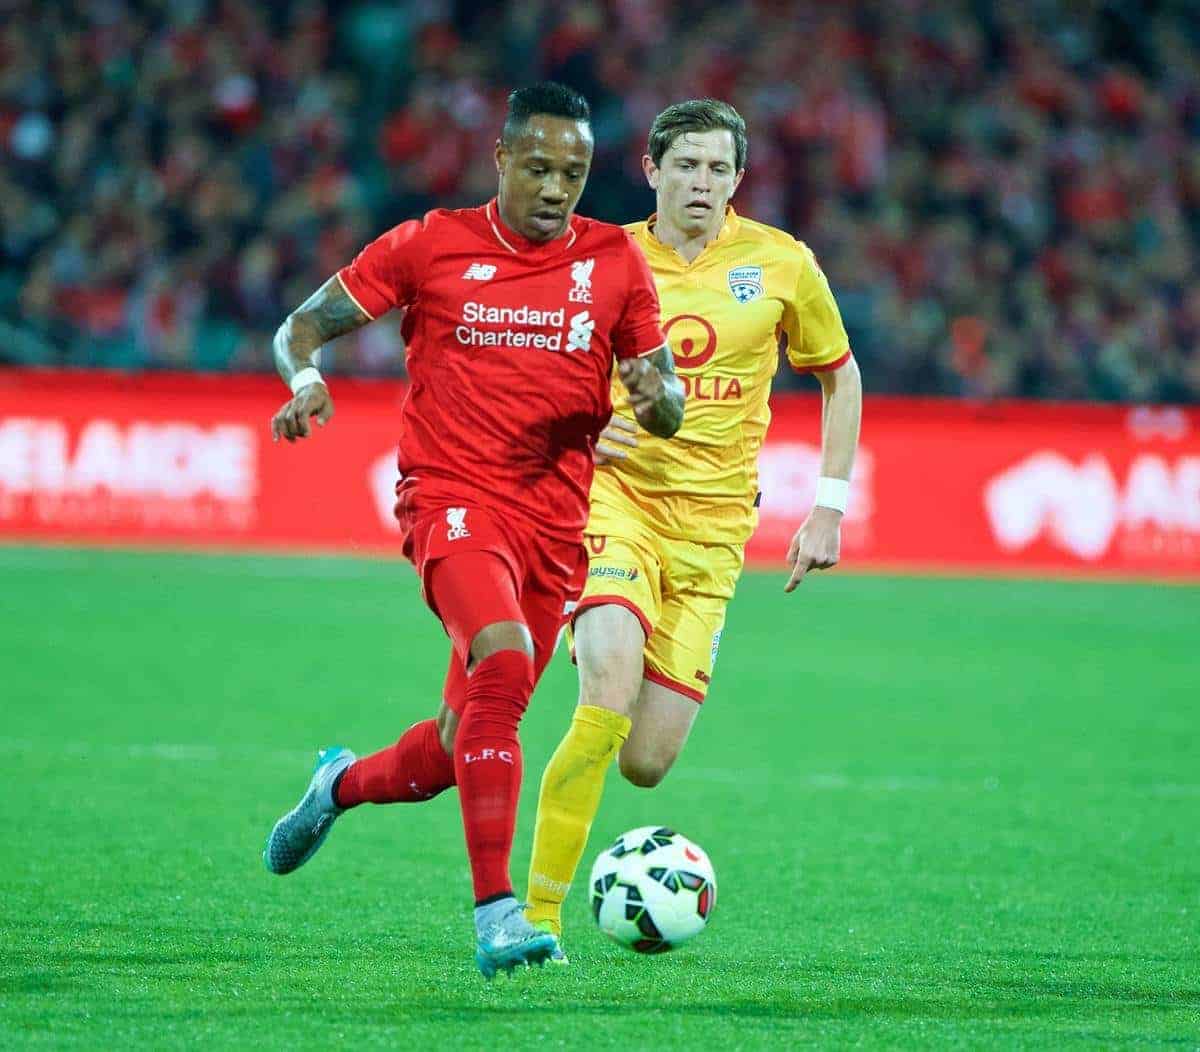 ADELAIDE, AUSTRALIA - Monday, July 20, 2015: Liverpool's Nathaniel Clyne in action against Adelaide United during a preseason friendly match at the Adelaide Oval on day eight of the club's preseason tour. (Pic by David Rawcliffe/Propaganda)